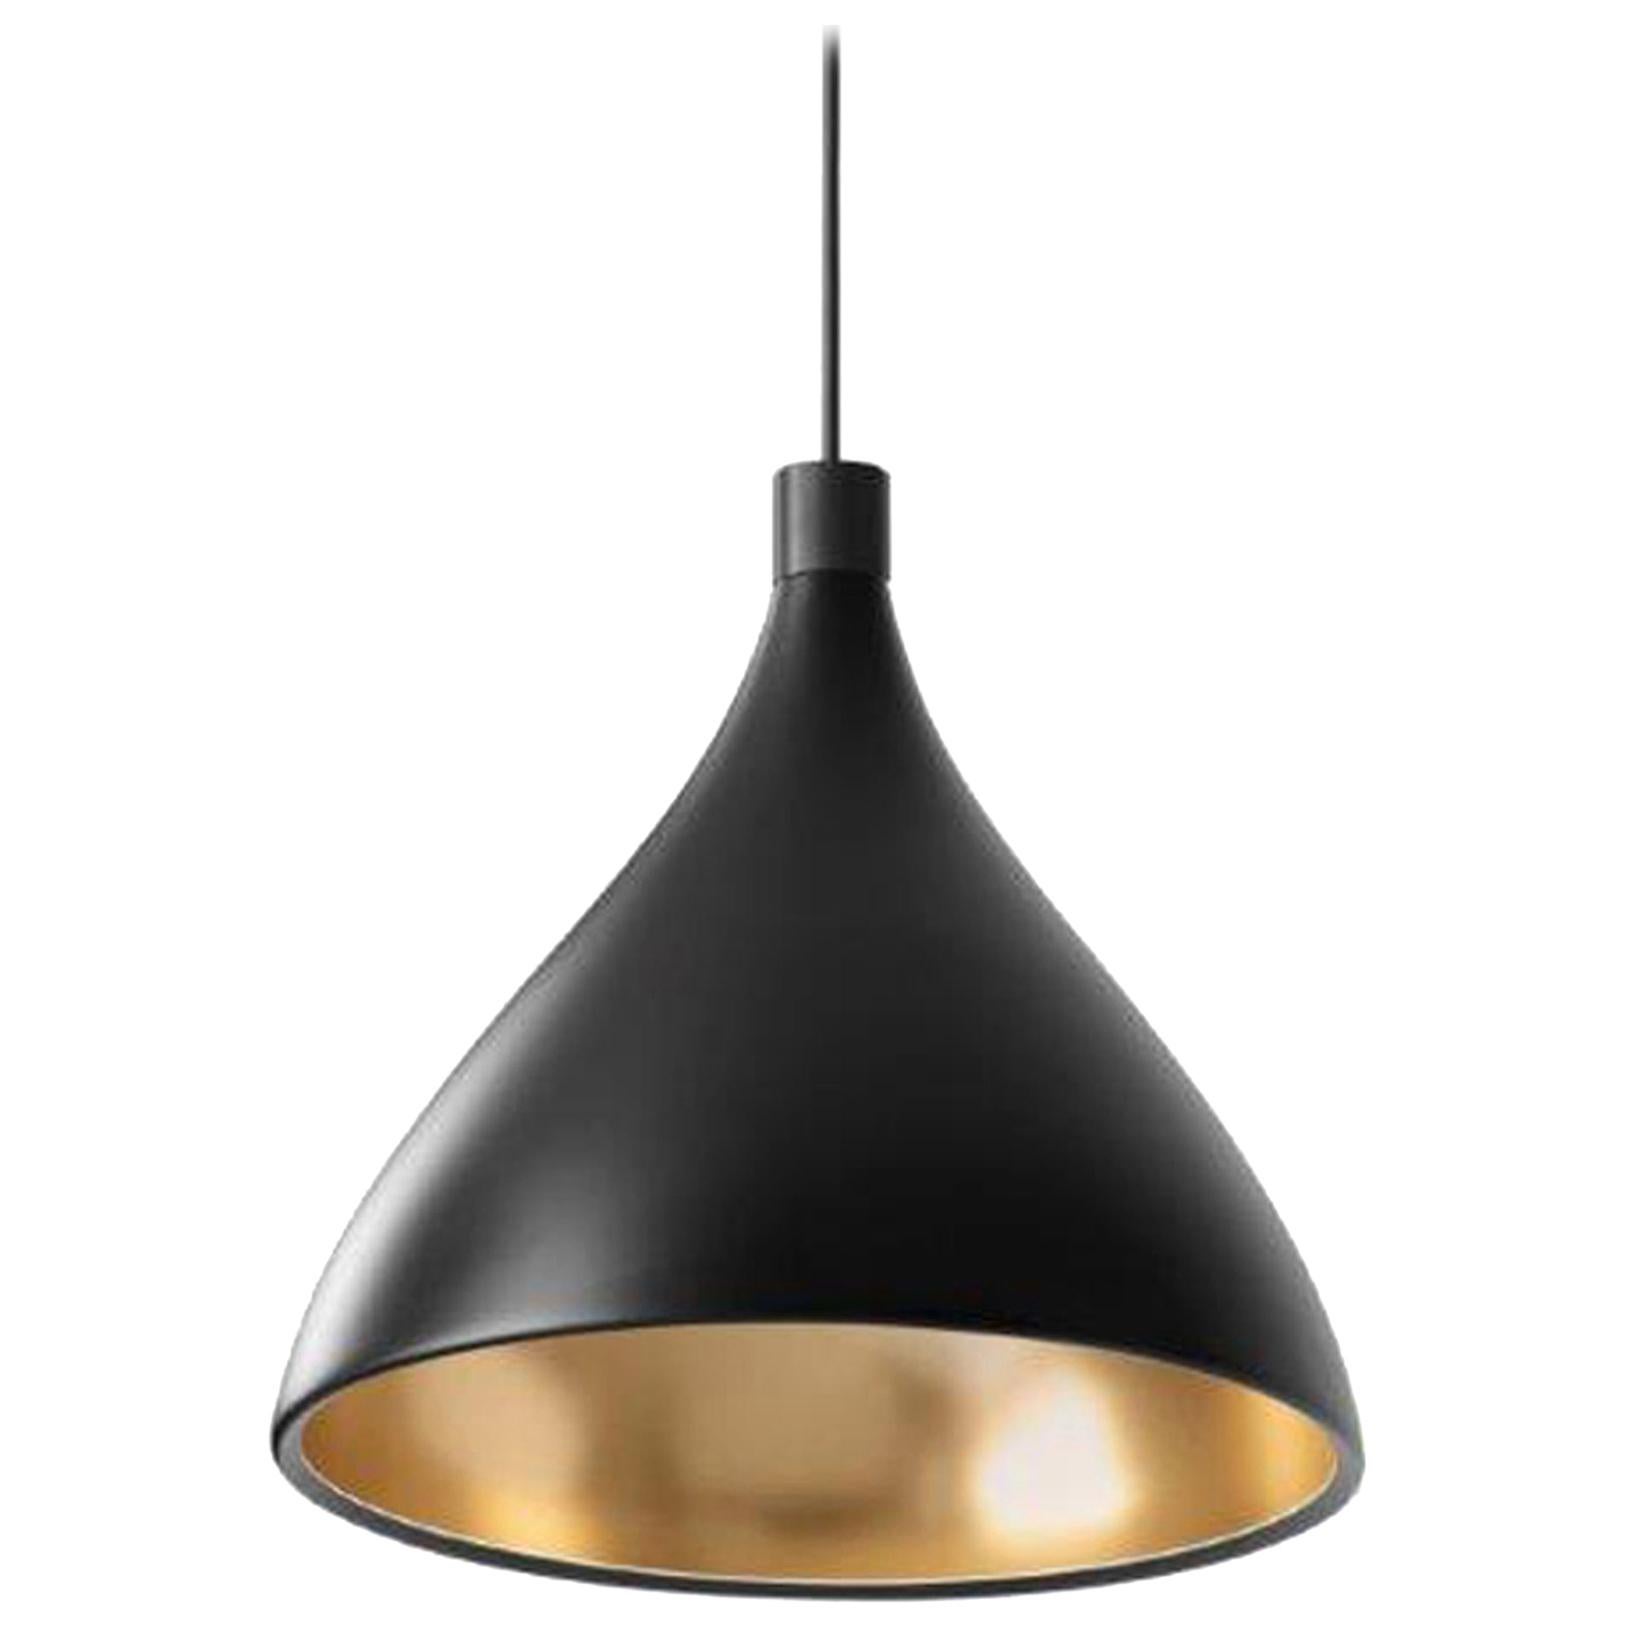 Swell XL Single Medium LED Pendant Lamp in Black and Brass by Pablo Designs For Sale